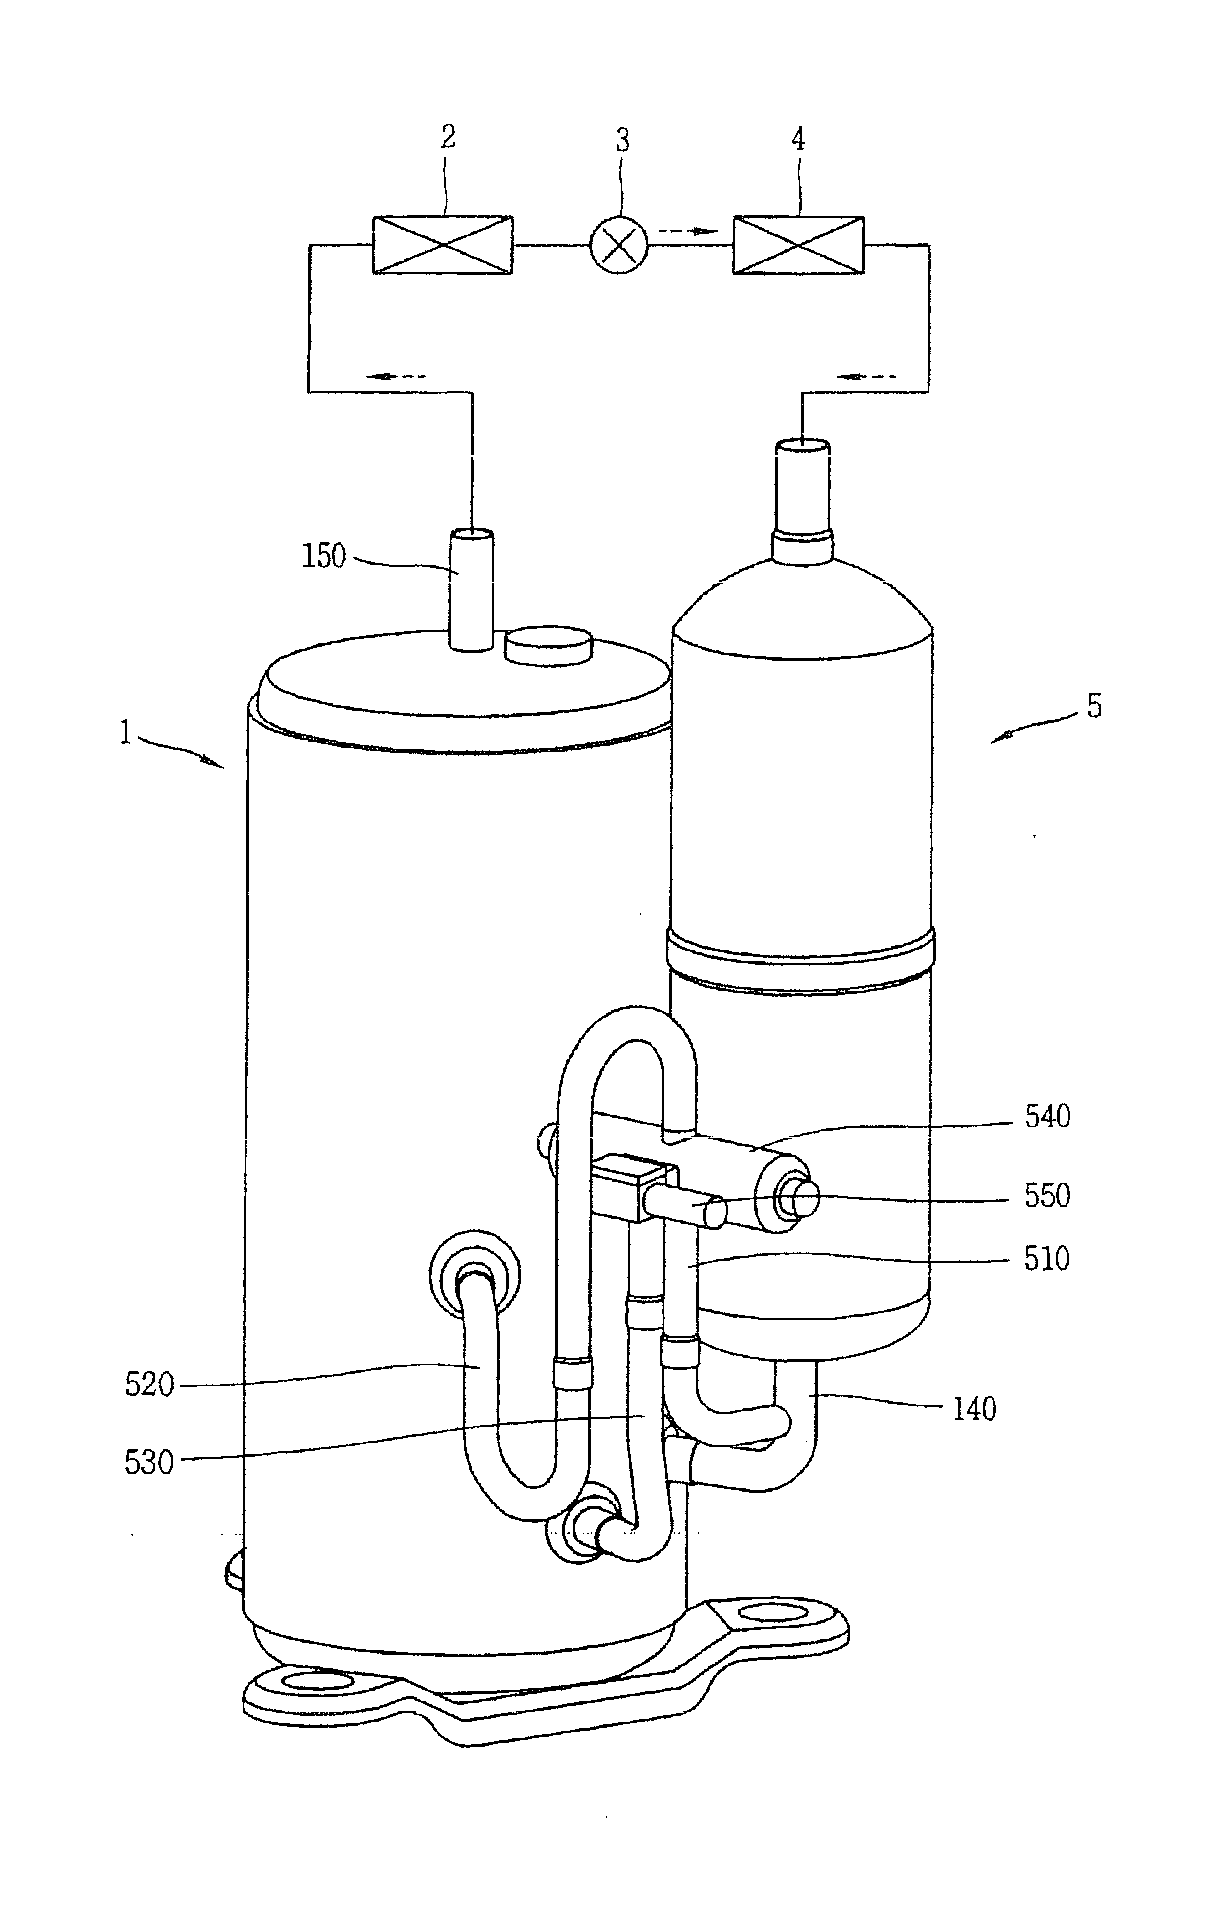 Variable capacity type rotary compressor